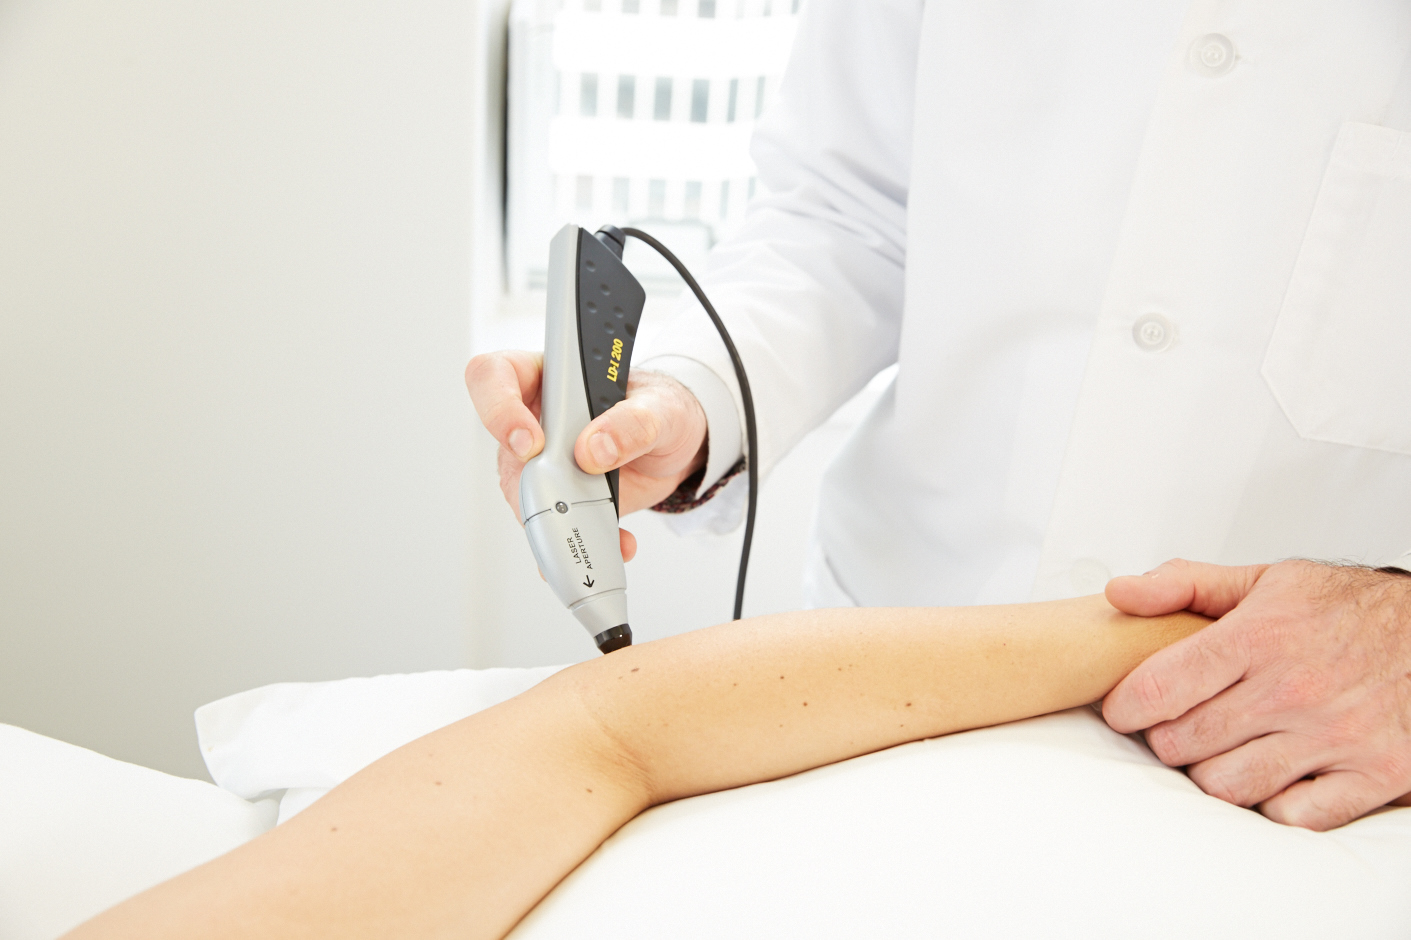 PBM Therapy & Laser Therapy, image of a physician using a PBM Therapy and Laser Therapy device on a patient's elbow.